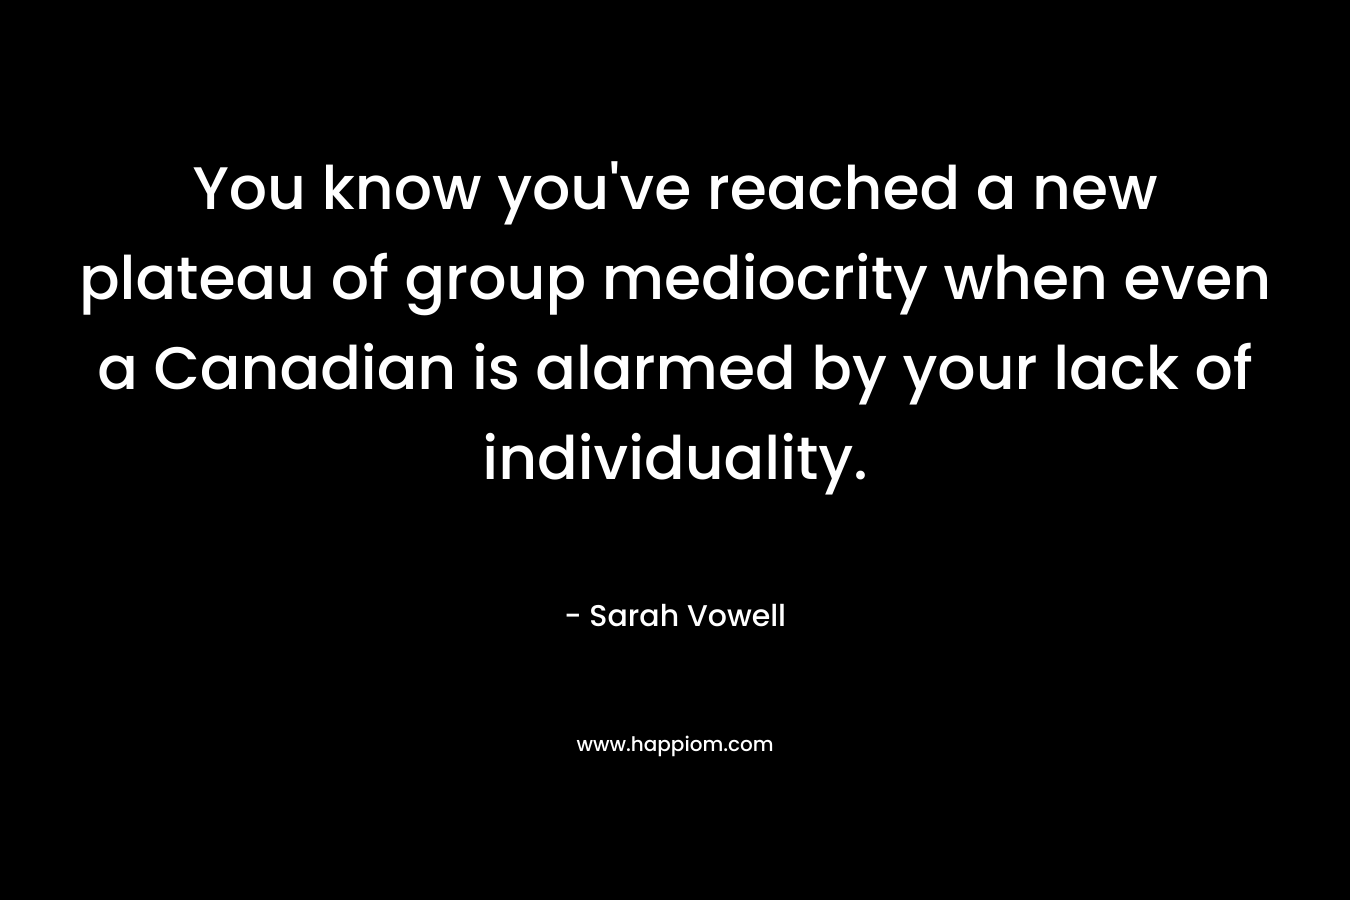 You know you’ve reached a new plateau of group mediocrity when even a Canadian is alarmed by your lack of individuality. – Sarah Vowell